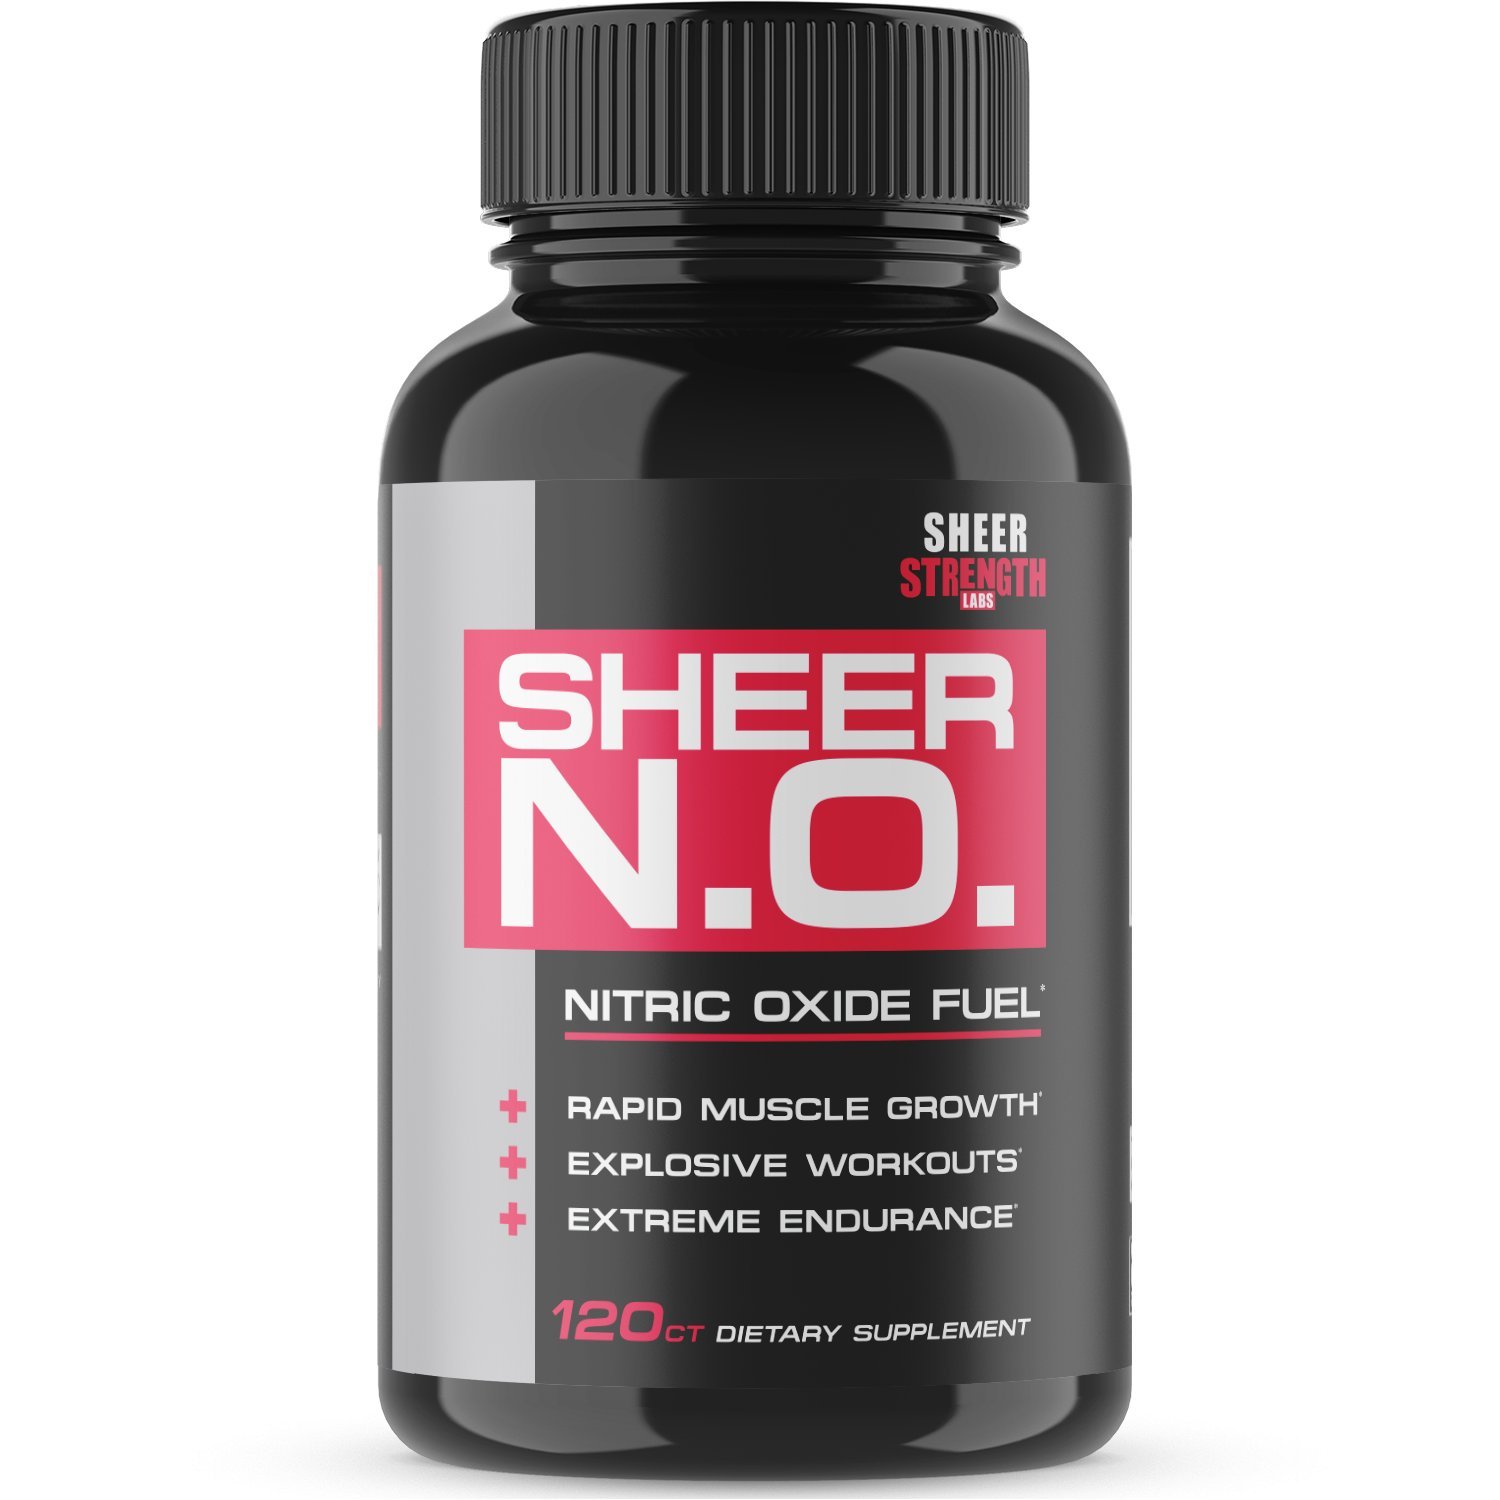 Sheer Strength Nitric Oxide Supplement - Muscle Building Nitric Oxide Booster with L Arginine and L Citrulline - Supports Vascularity & Energy - Promotes Muscle Growth & Pumps (30 Day Supply)